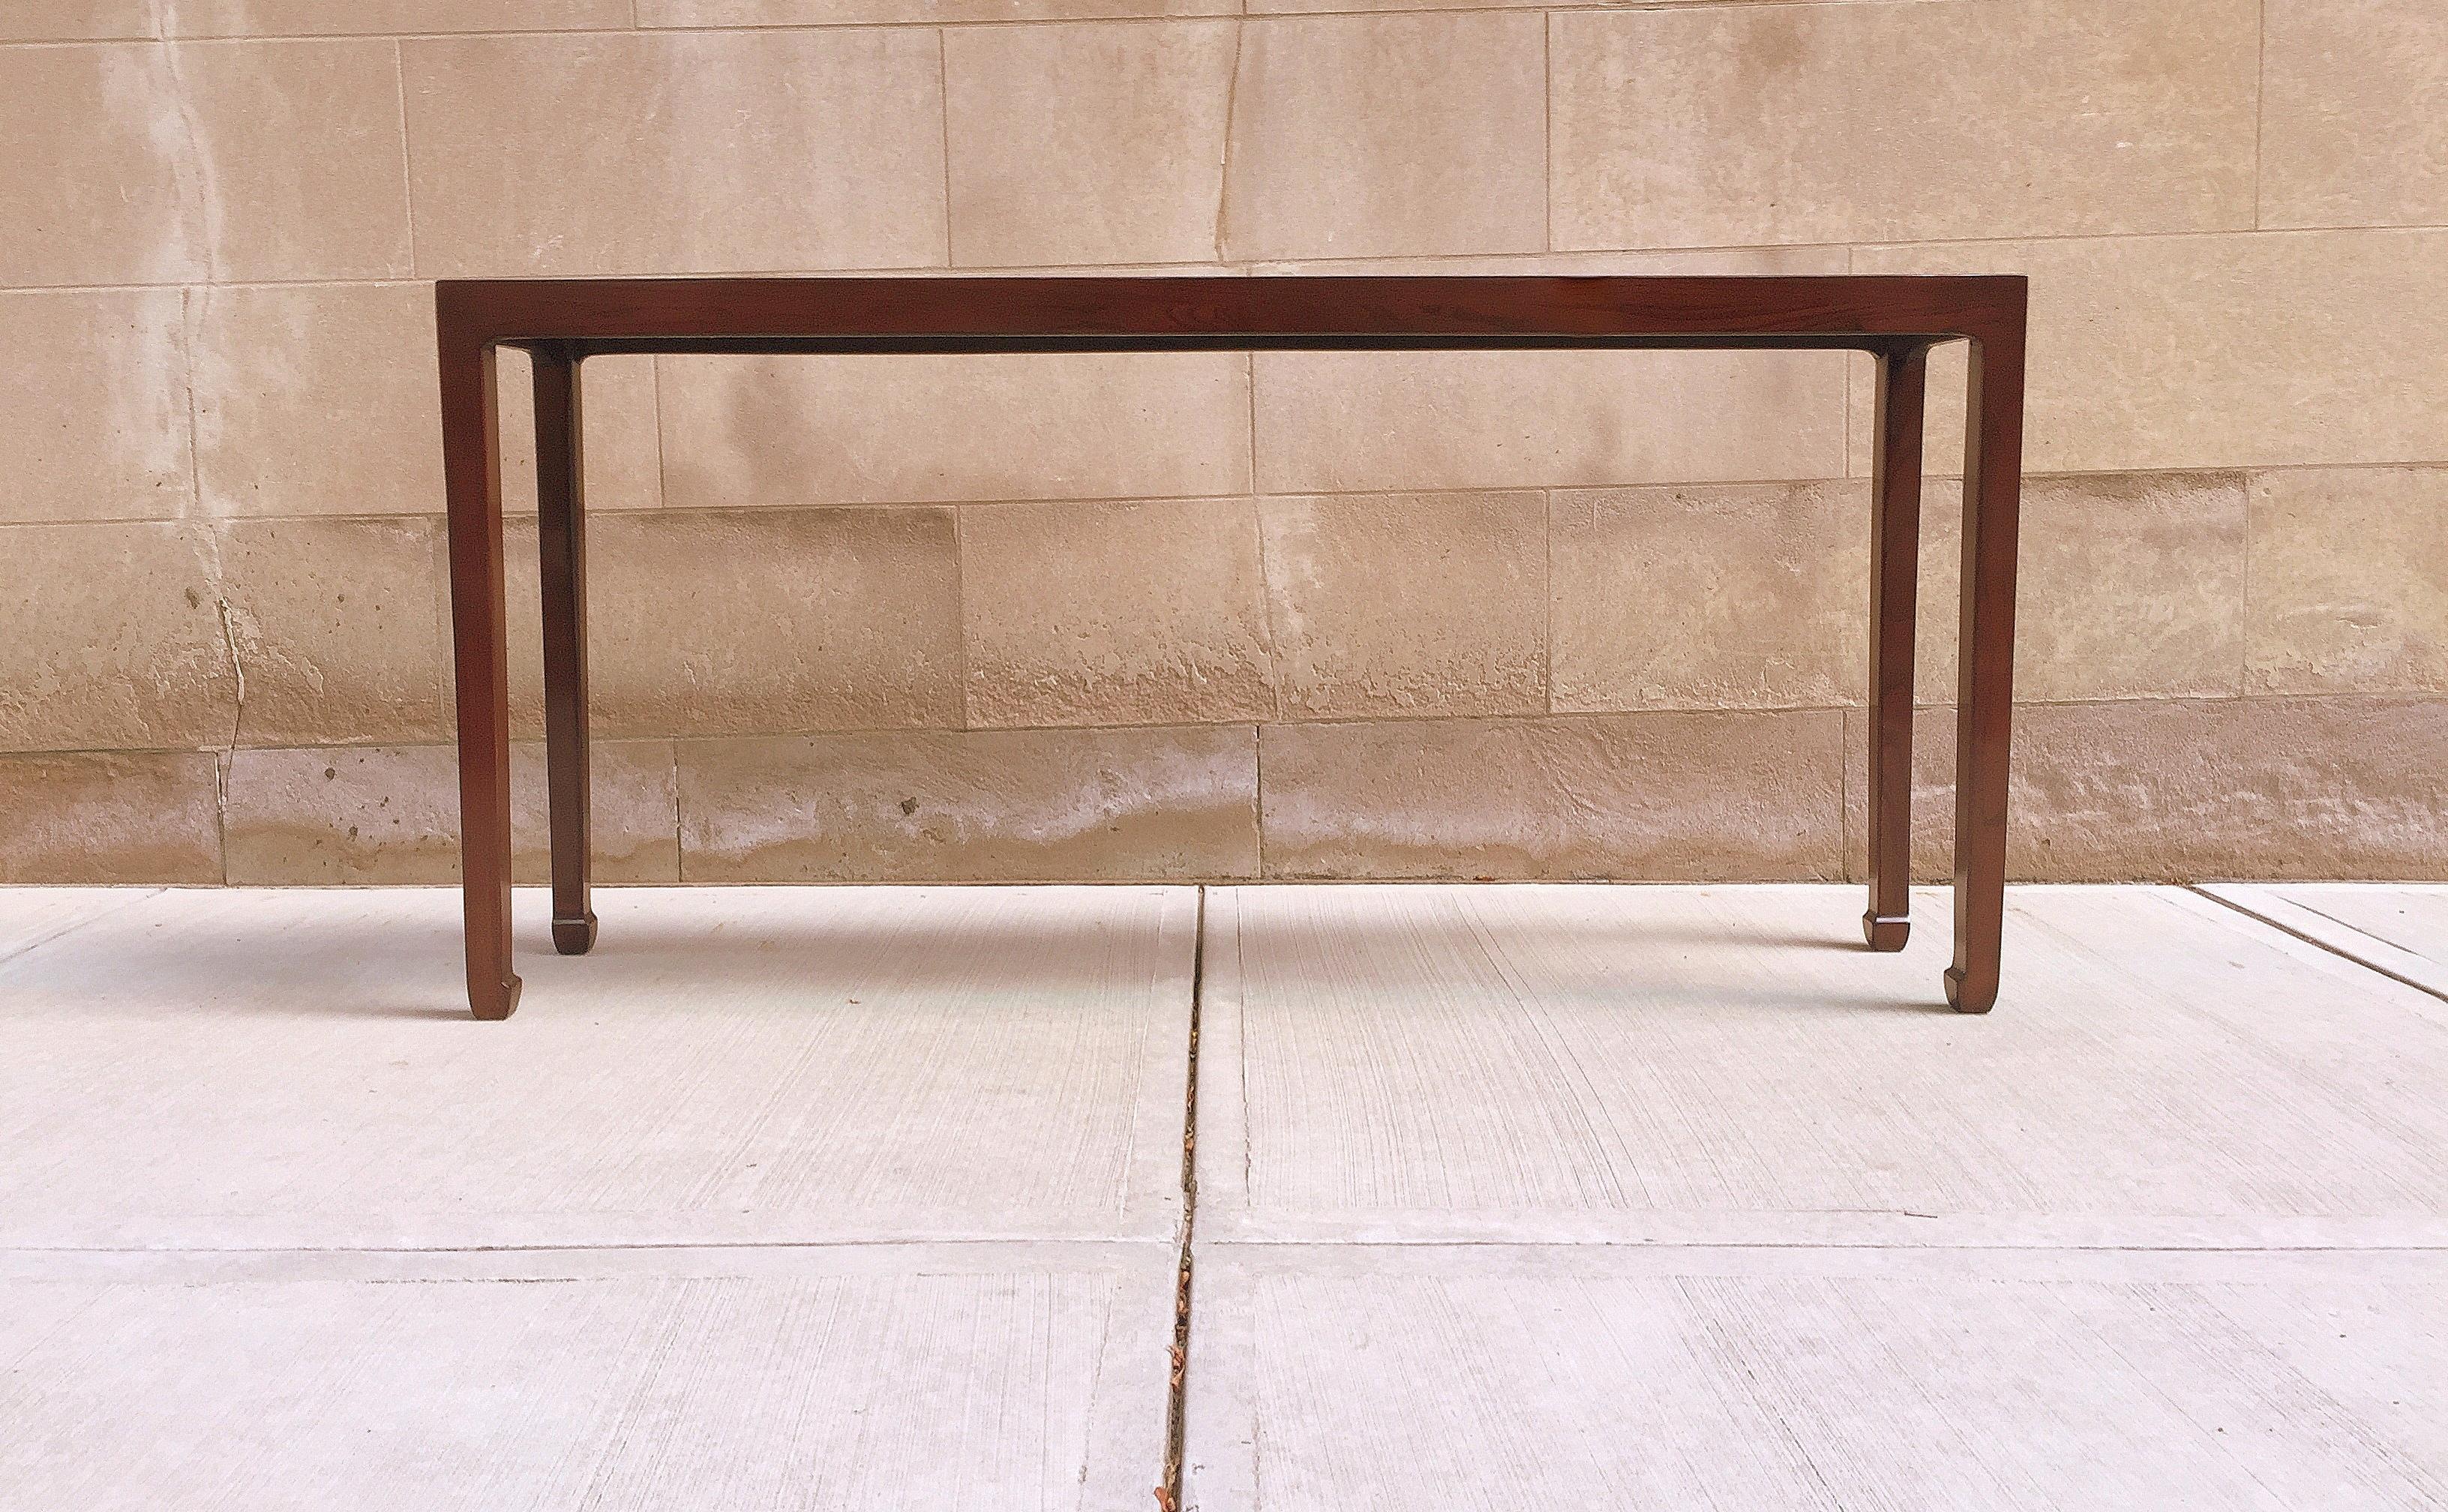 A simple and elegant ju mu wood console table, beautiful color, form and lines. We carry fine quality furniture with elegant finished and has been appeared many times in 